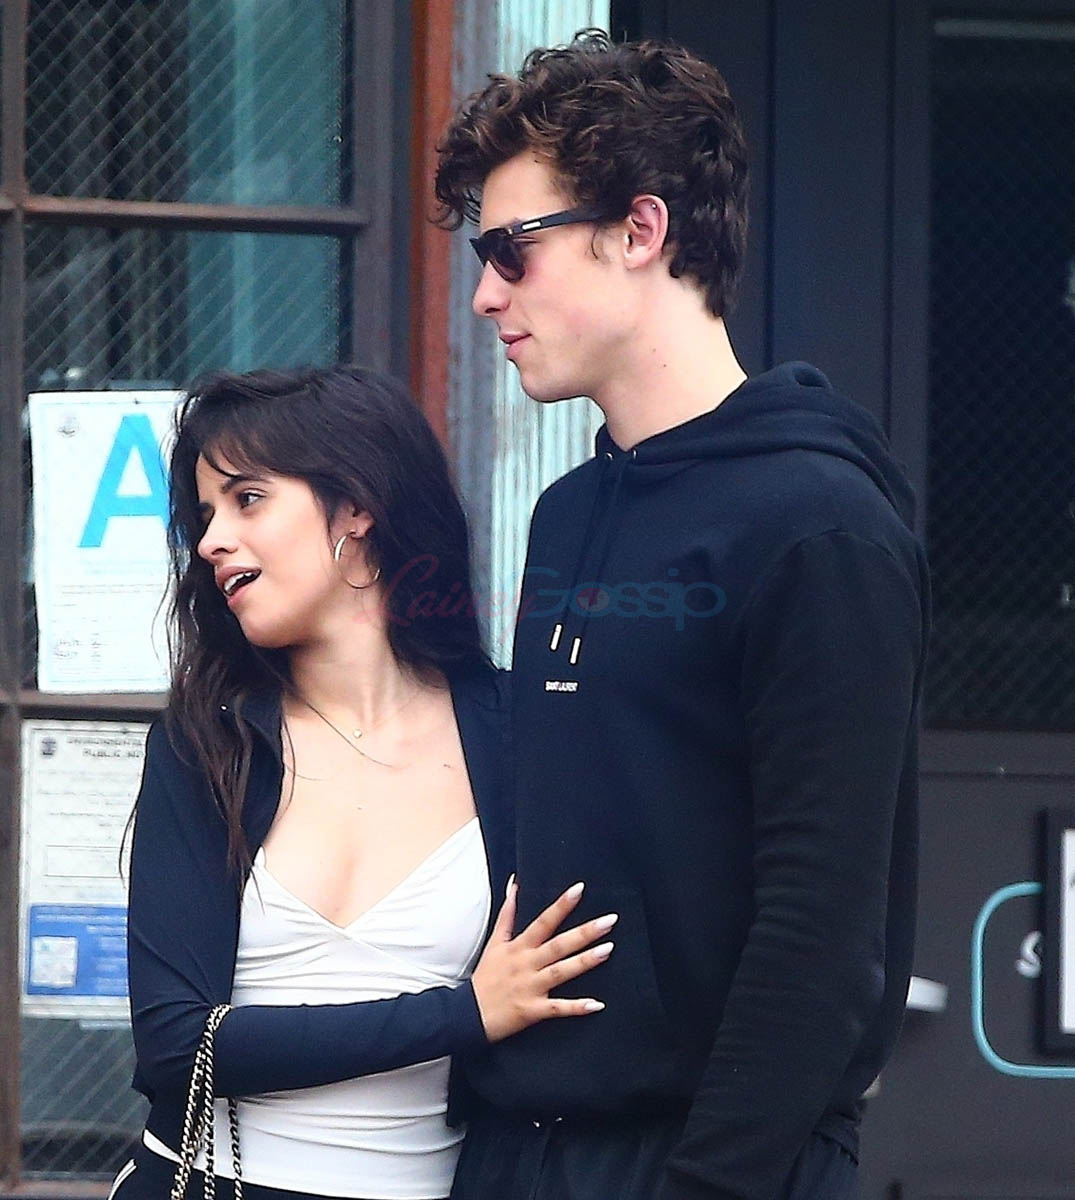 Shawn Mendes and Camila Cabello look very much together during Sunday brunch1075 x 1200